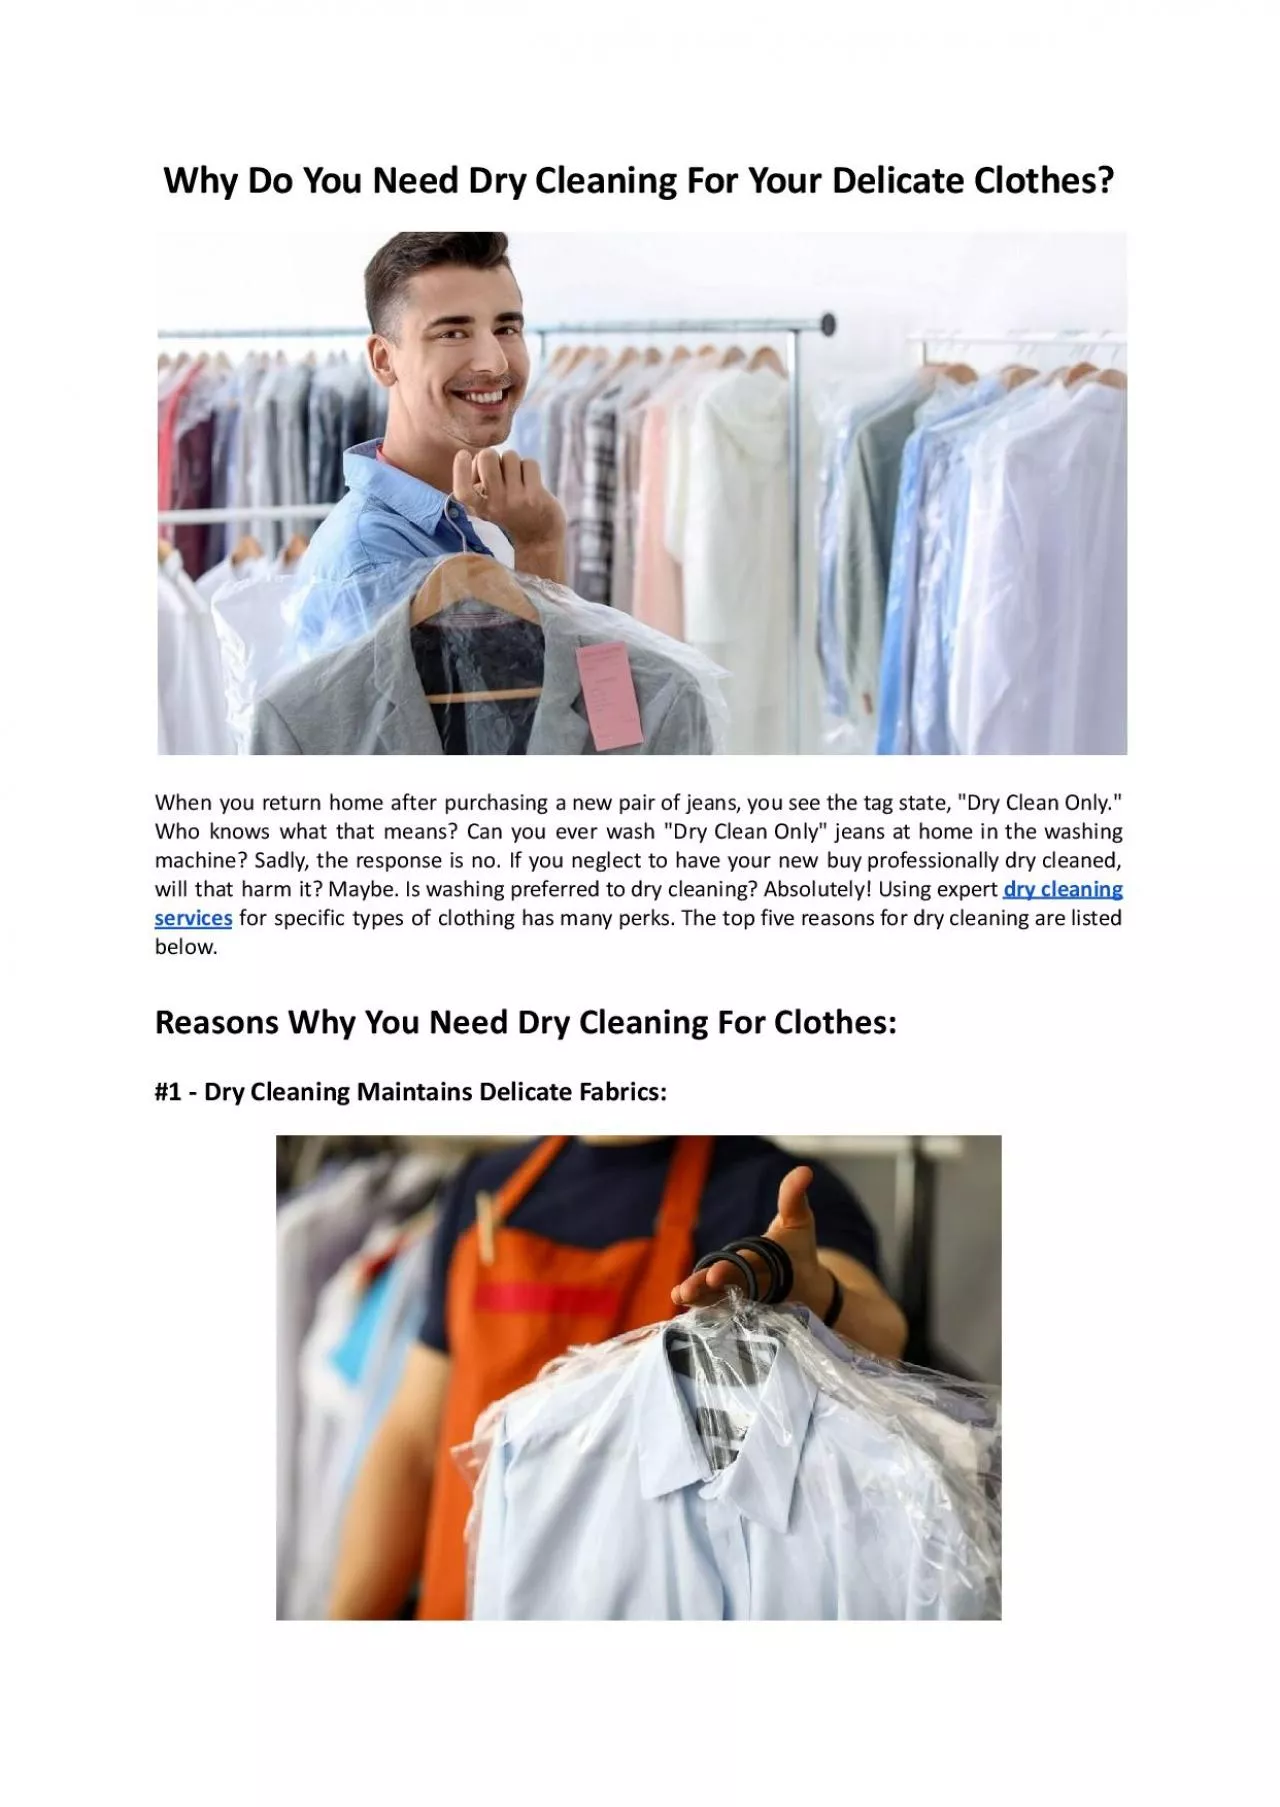 Why Do You Need Dry Cleaning For Your Delicate Clothes - Hello Laundry